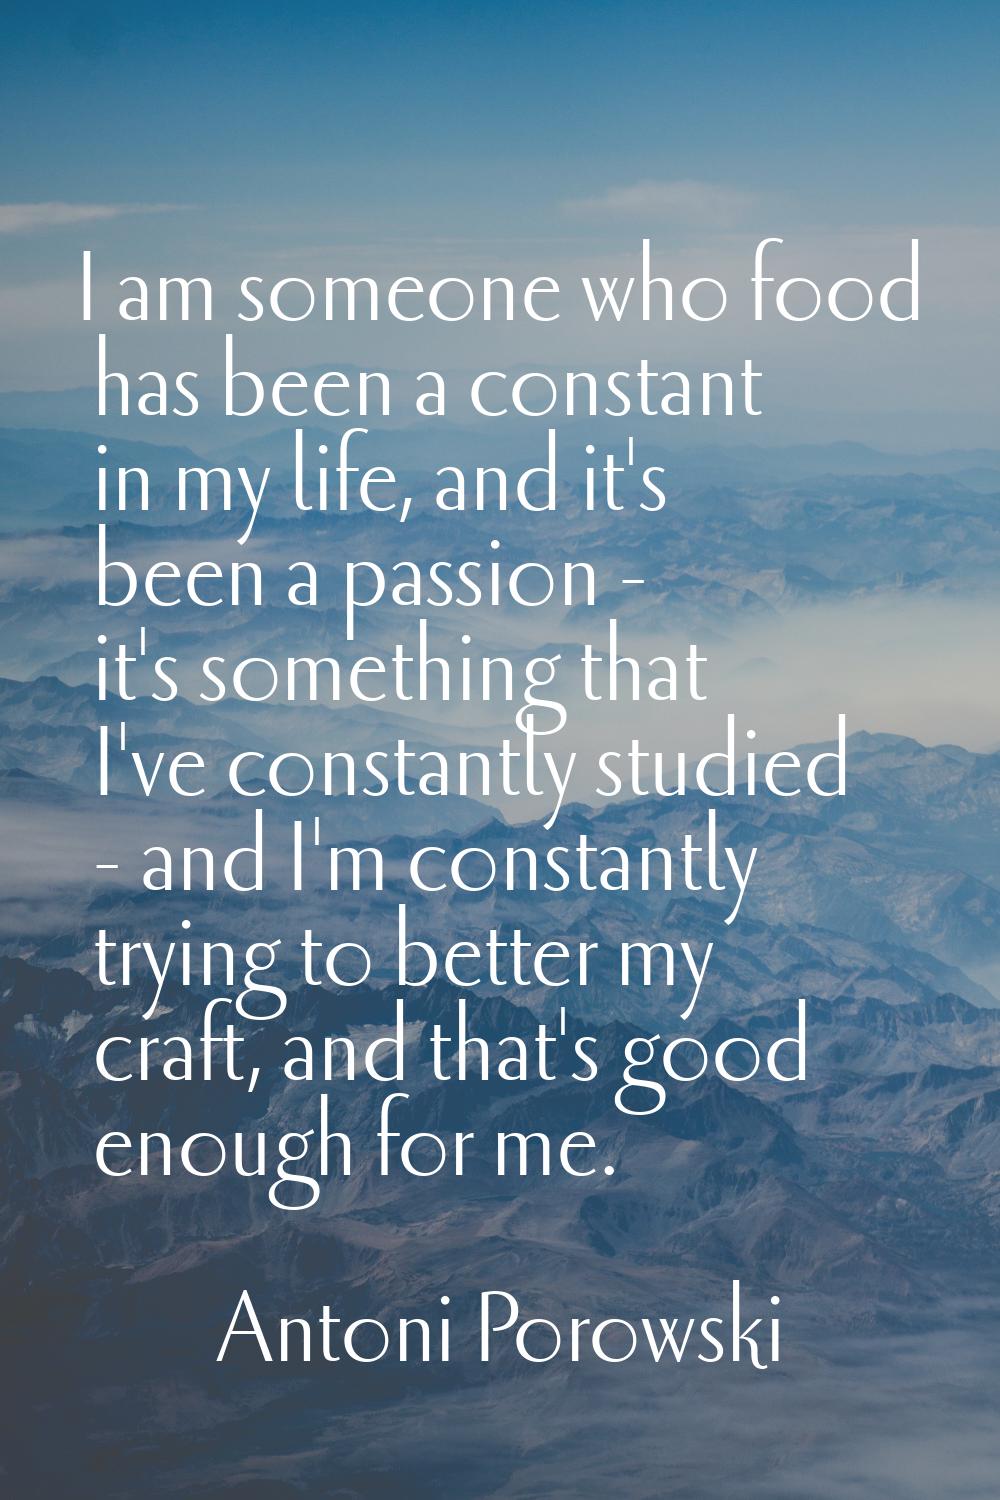 I am someone who food has been a constant in my life, and it's been a passion - it's something that